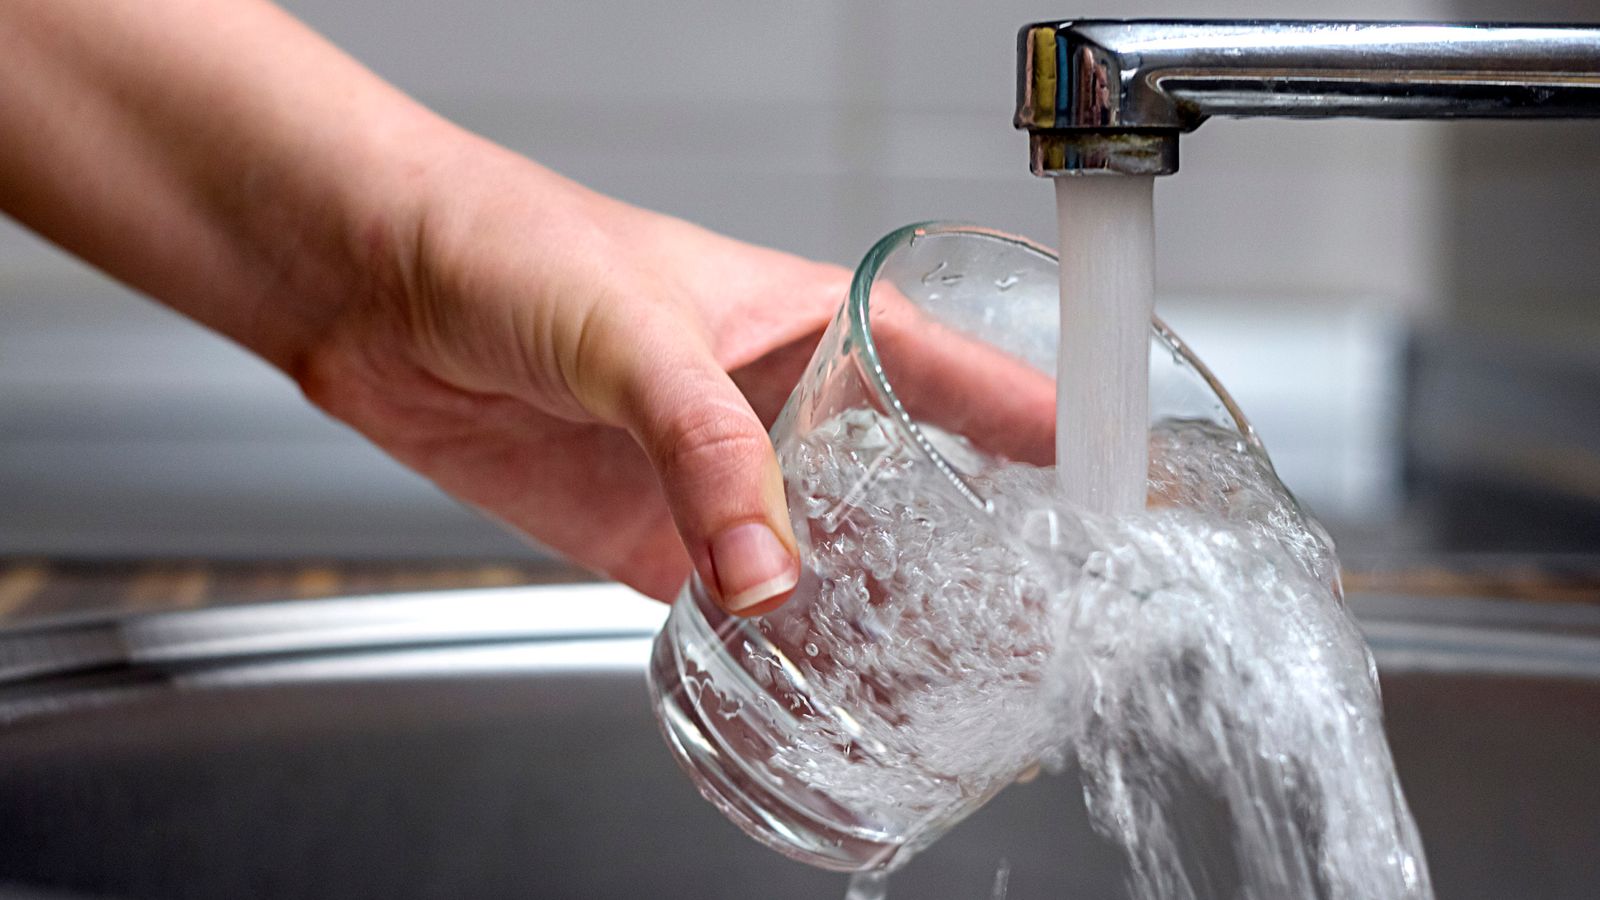 Welsh Water to pay customers £10 each over inaccurate leakage data